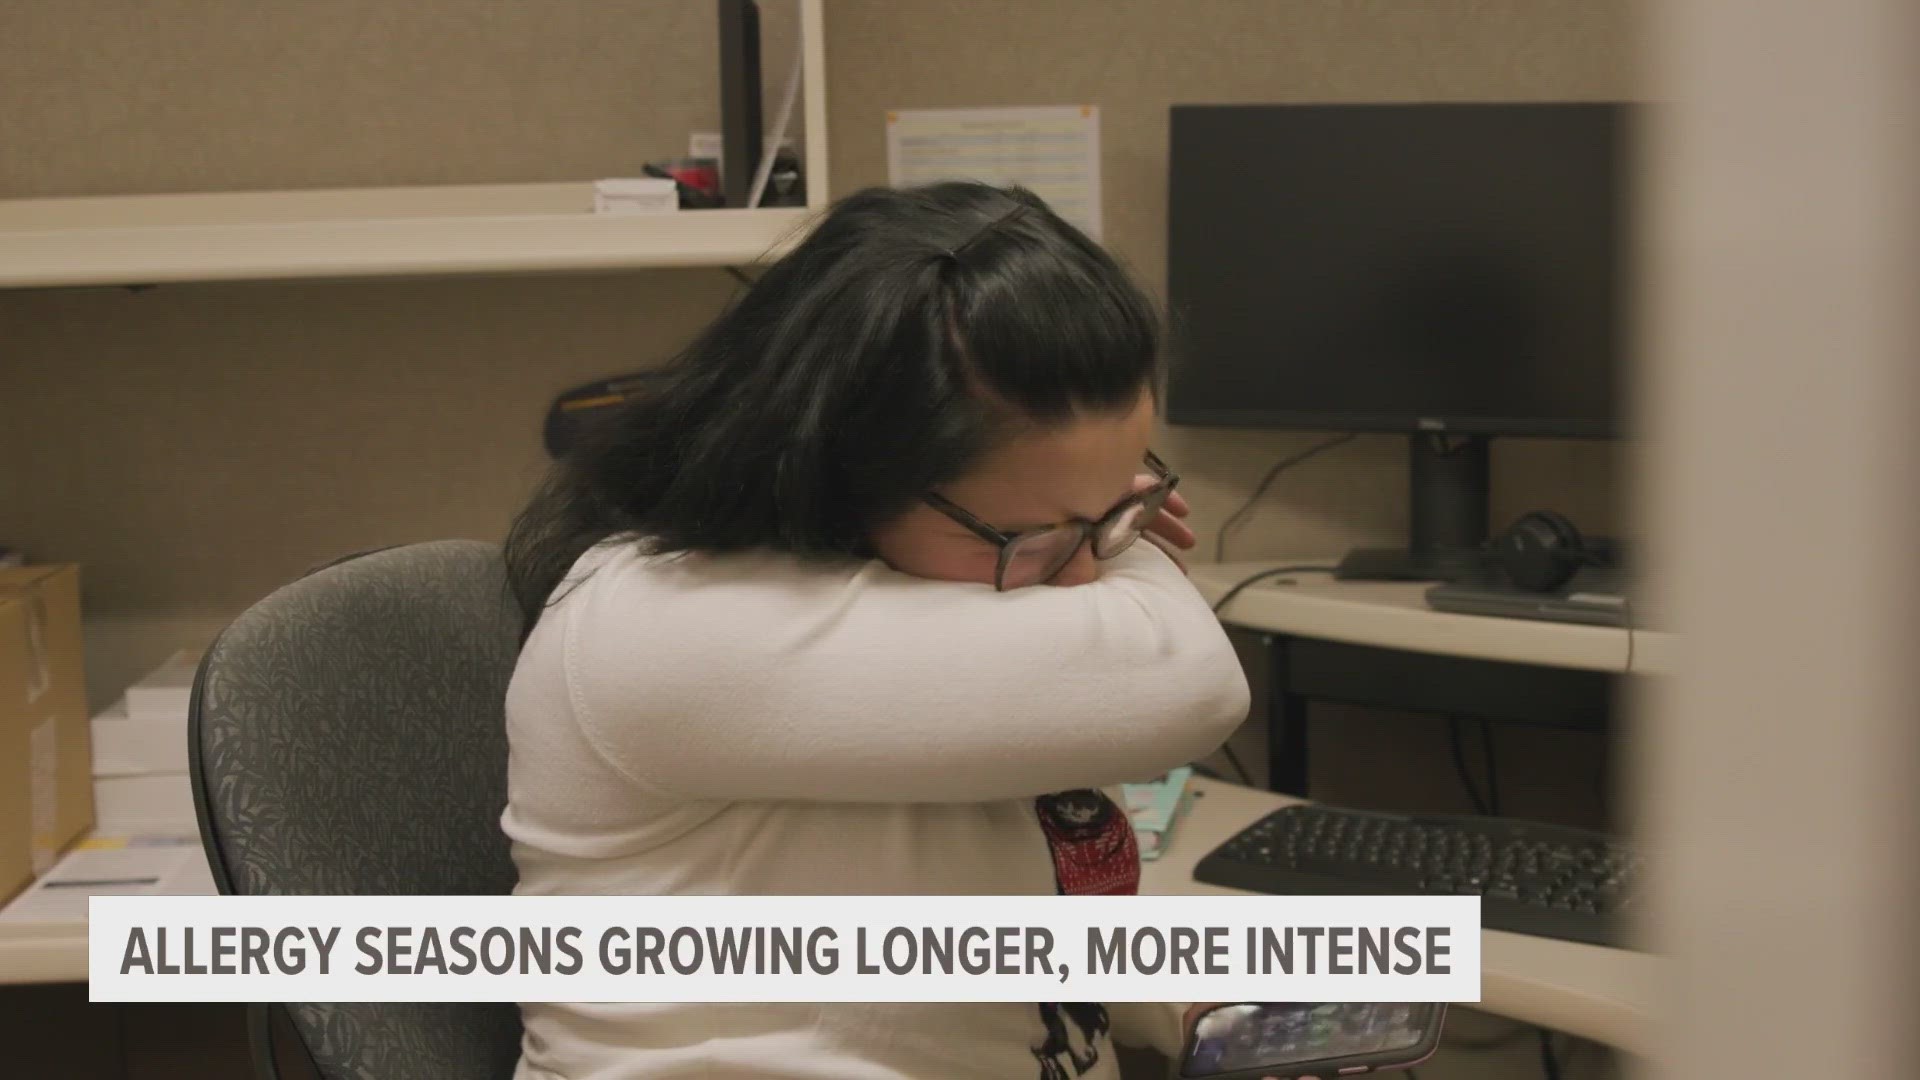 Experts say that allergy seasons are continuing to get longer and more intense.